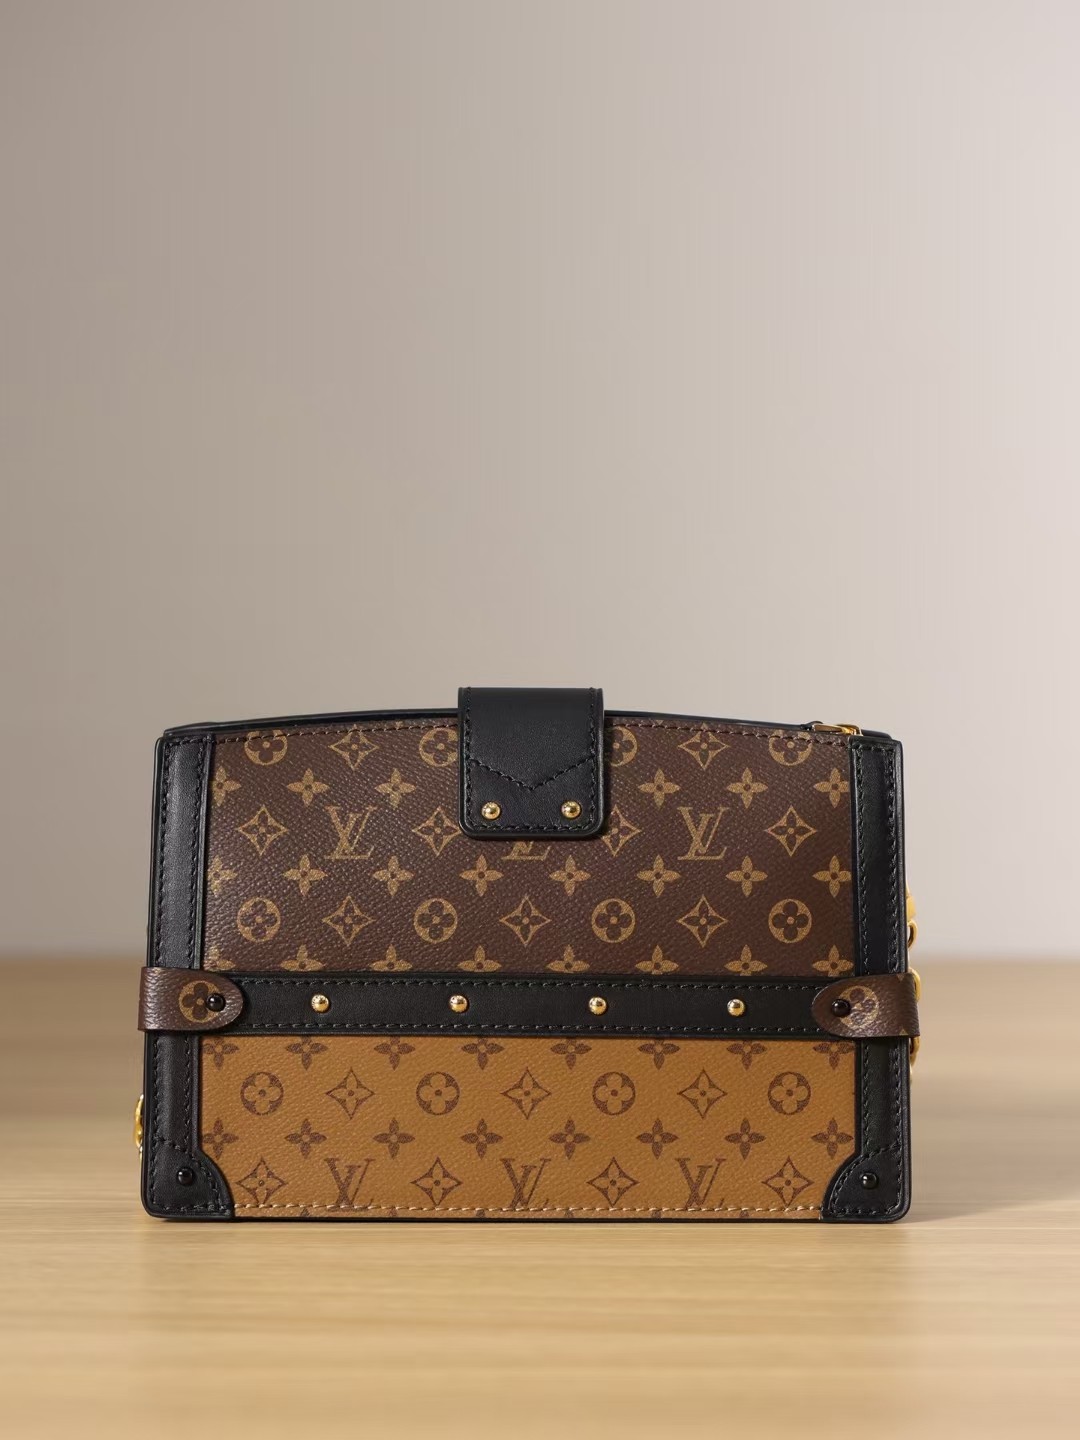 Louis Vuitton stores can not buy, why I buy top replica M43596 TRUNK CLUTCH bags? (2022 updated))-Best Quality Fake Louis Vuitton Bag Online Store, Replica designer bag ru